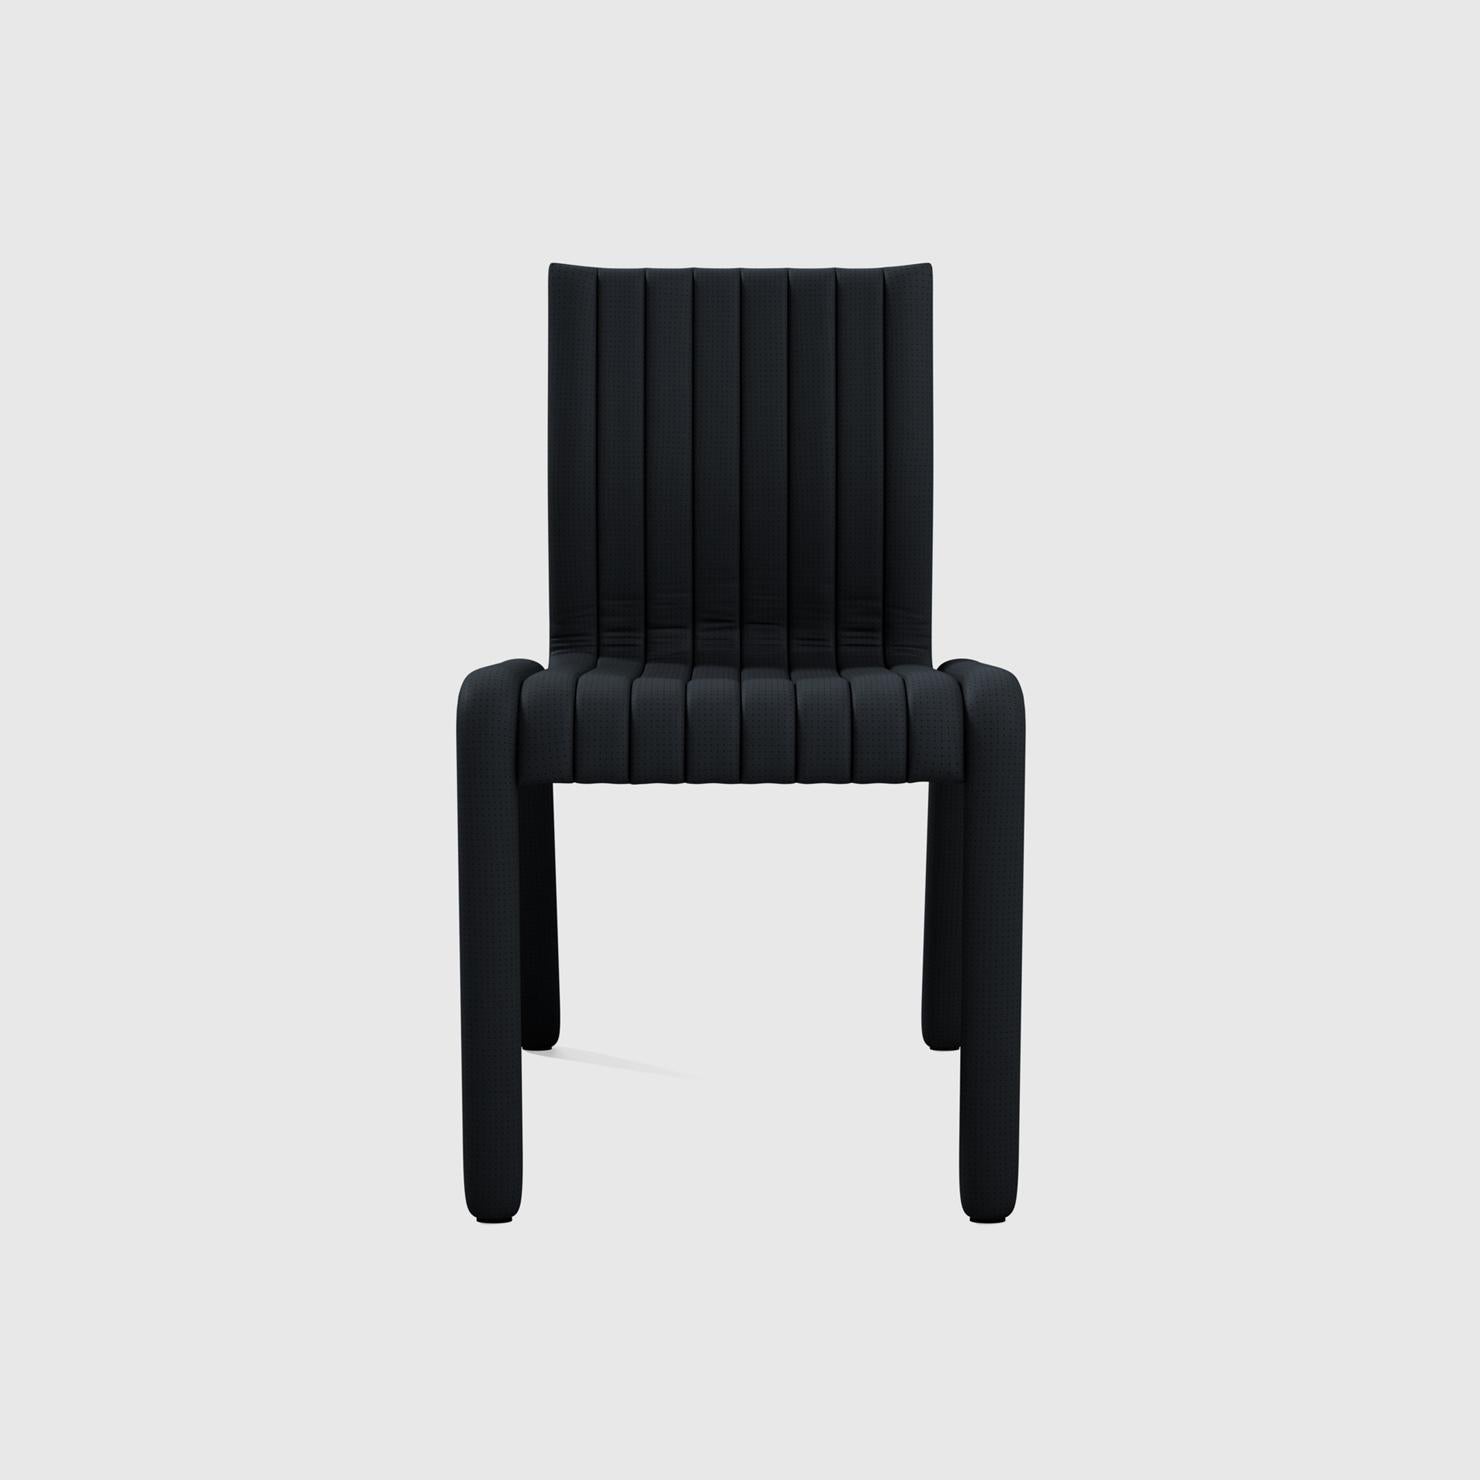 The Alexander Street side chair by Philippe Malouin evokes the leather sports seats of iconic sports cars of the 1980s he grew up with on Alexander Street in Montreal. Ribbed and perforated leather is handstitched over the entire piece. The sturdy